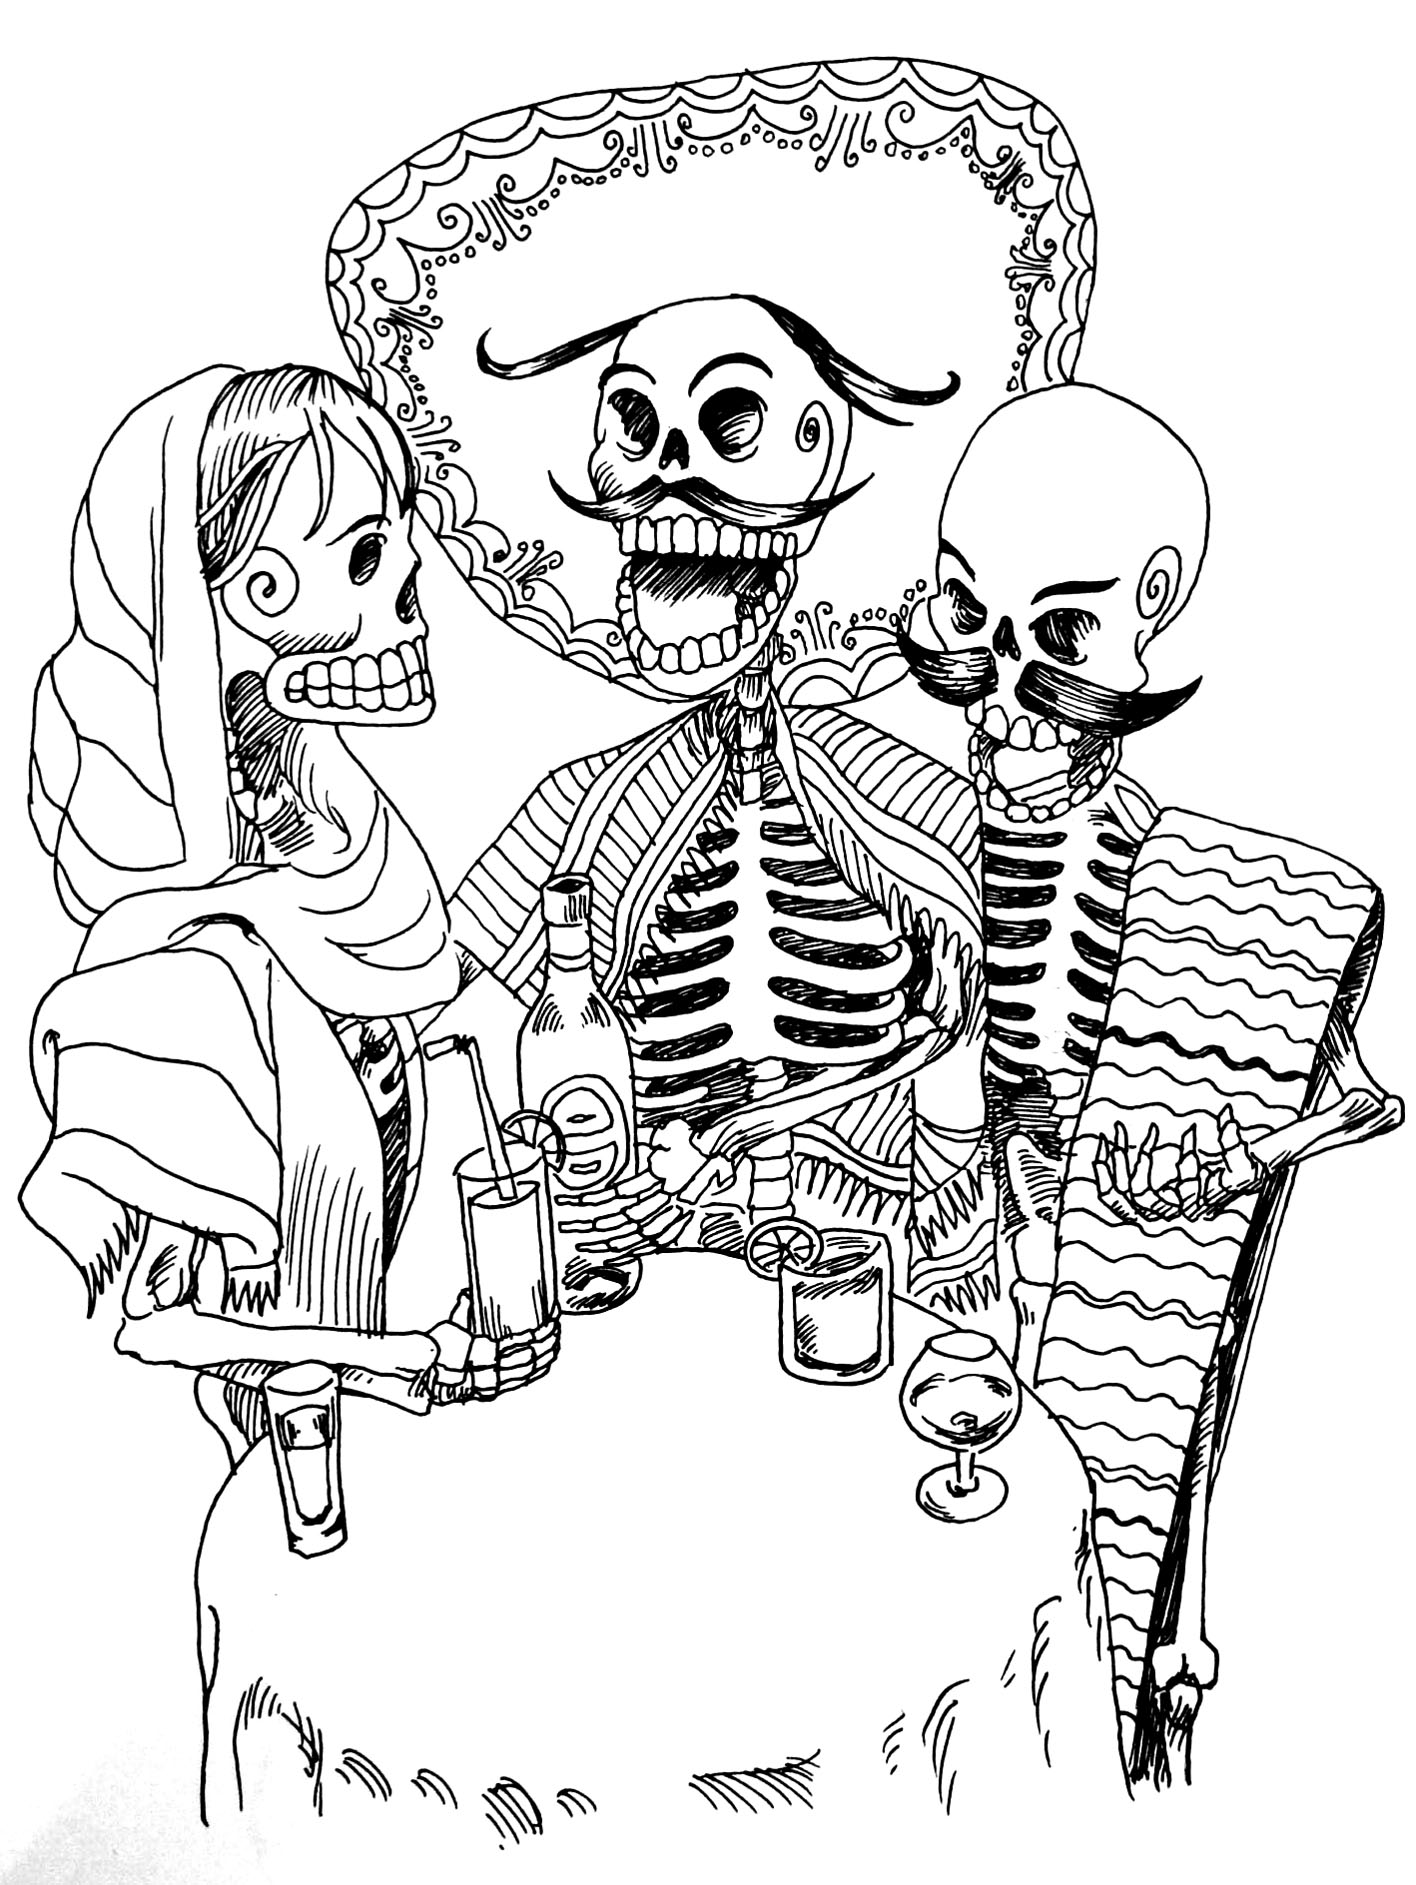 The skeletons celebrating their death - Tattoos Adult ...